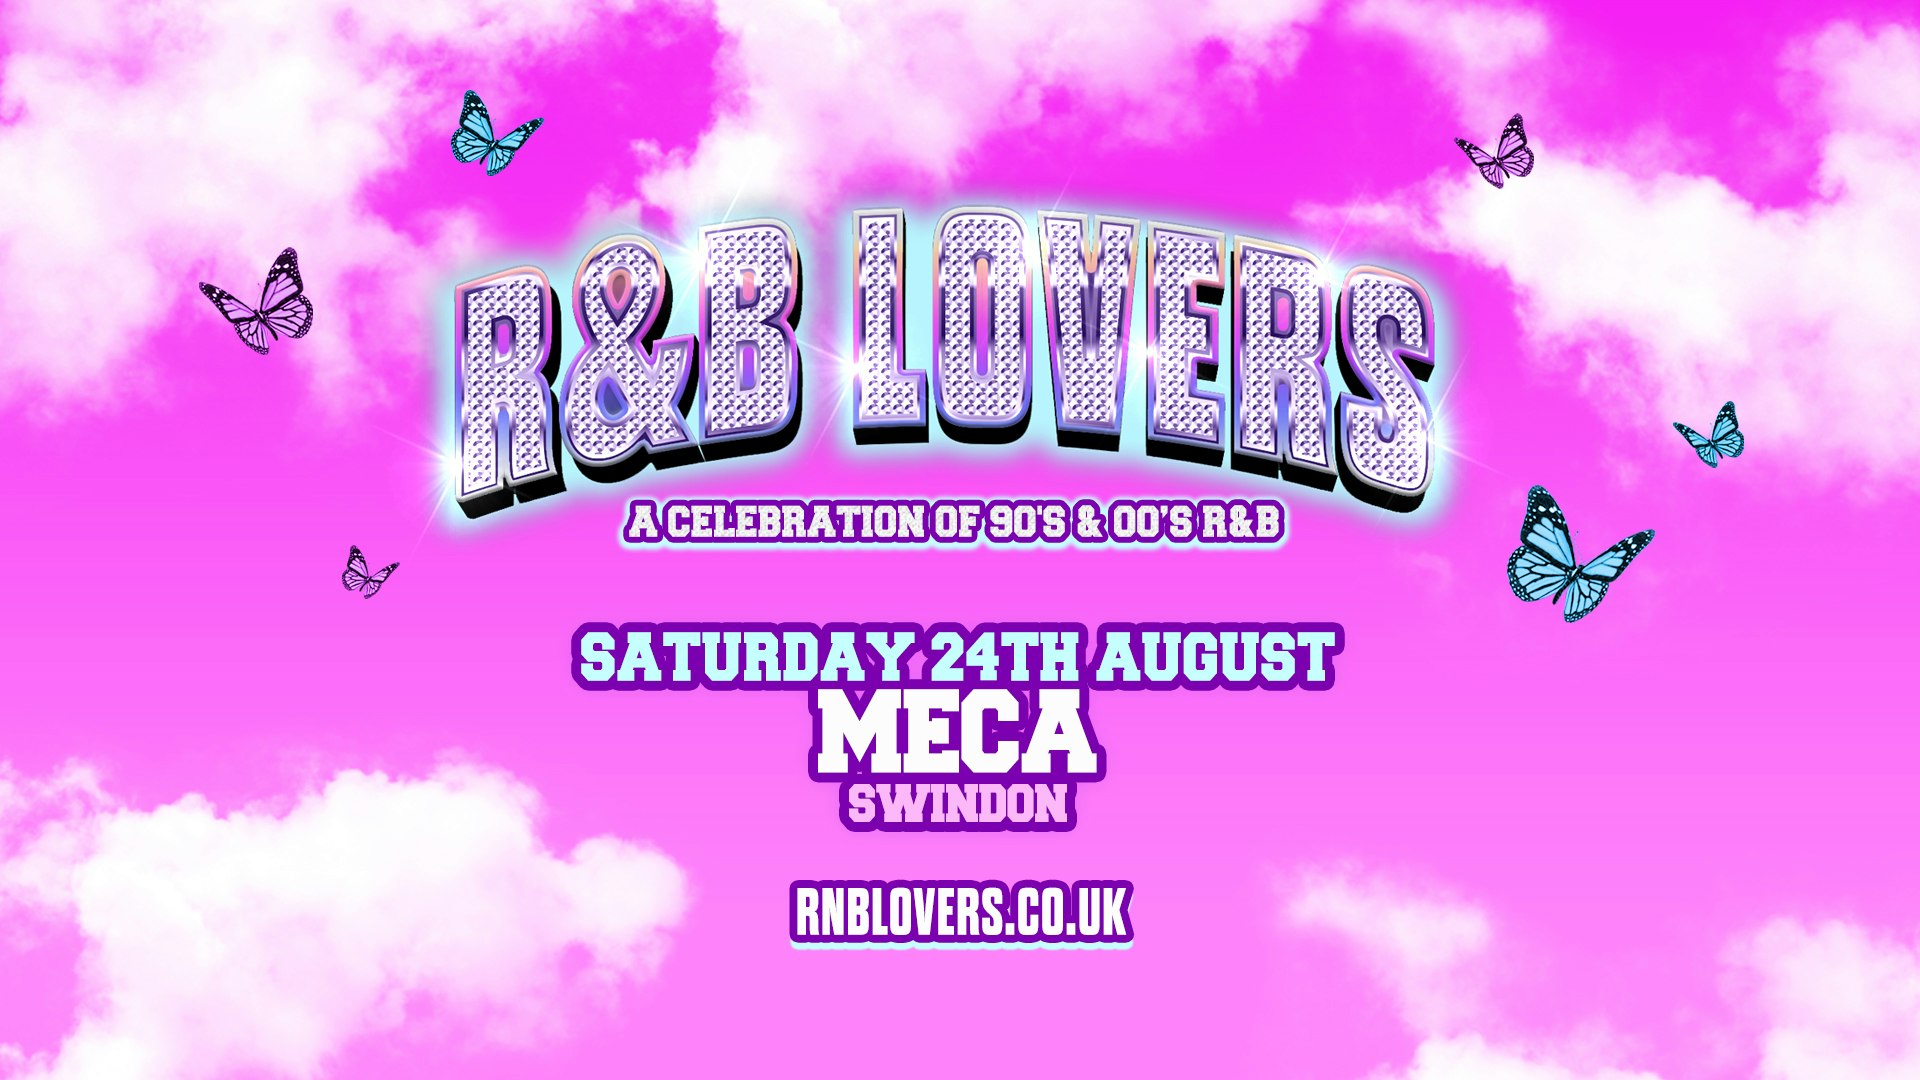 R&B Lovers – Saturday 24th August – Meca Swindon [GENERAL ADMISSION TICKETS ON SALE NOW]